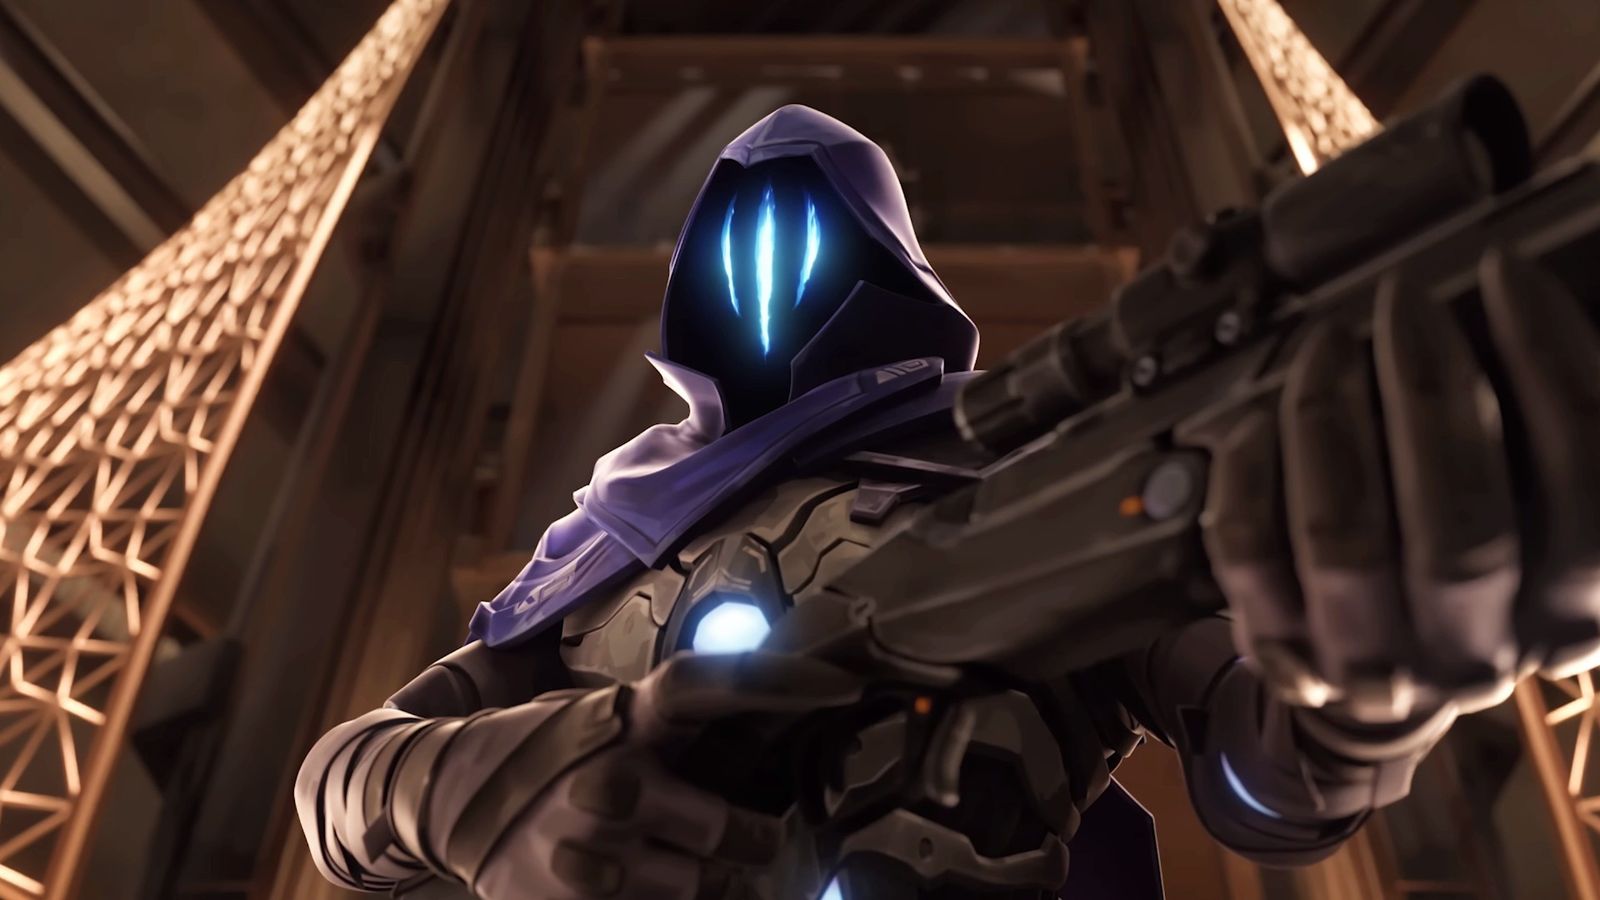 Valorant Episode 8 Act 1 trailer - person holding a sniper rifle, wearing a purple cloak and a full face mask with three vertical glowing blue lines across it